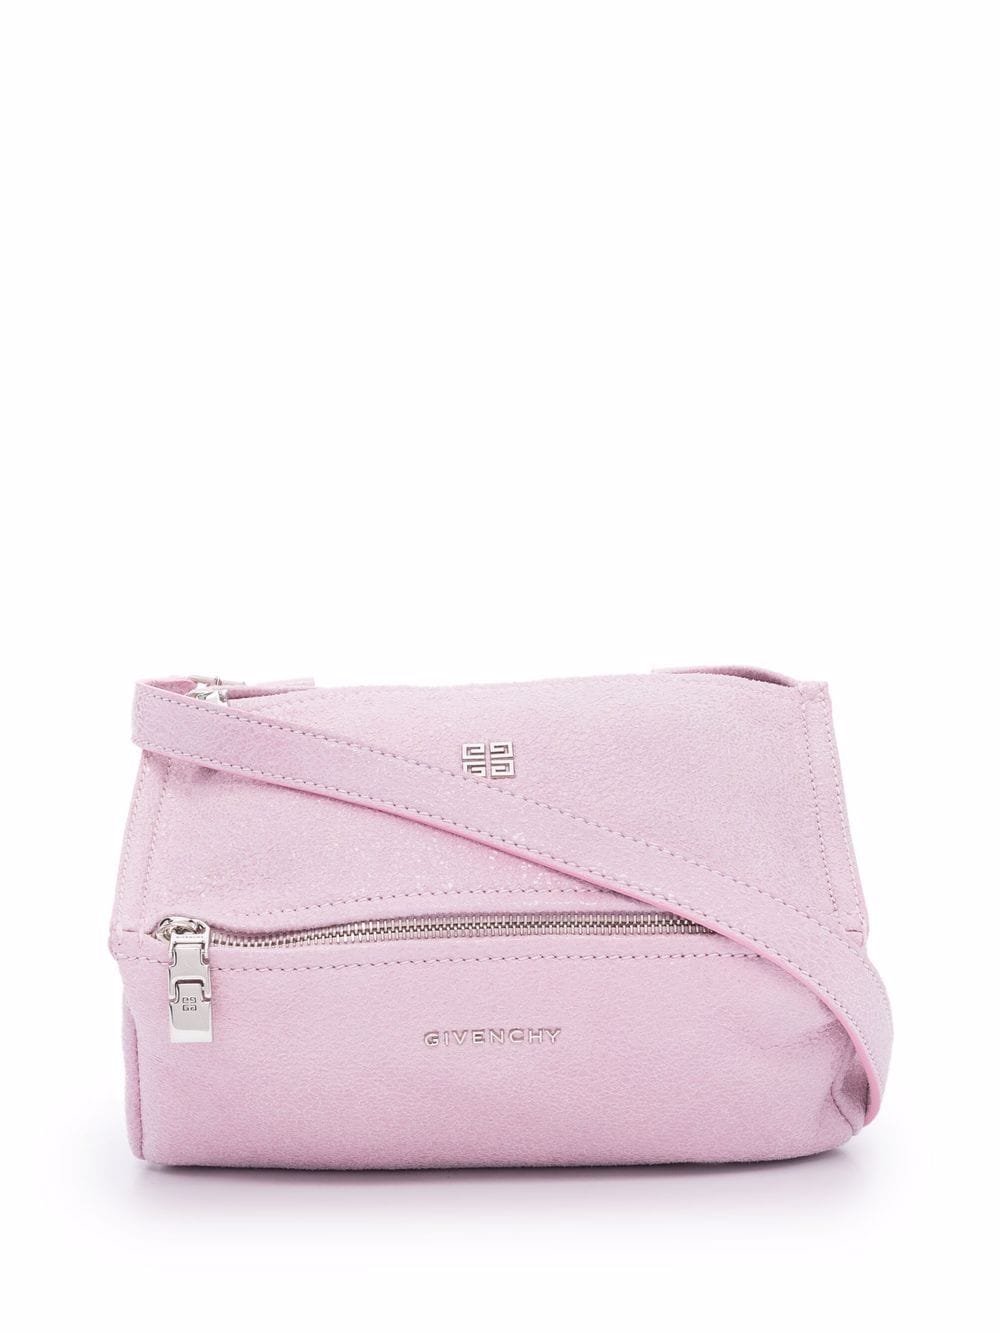 Givenchy Mini Pandora Bag In Pink Leather With Metallic Effect